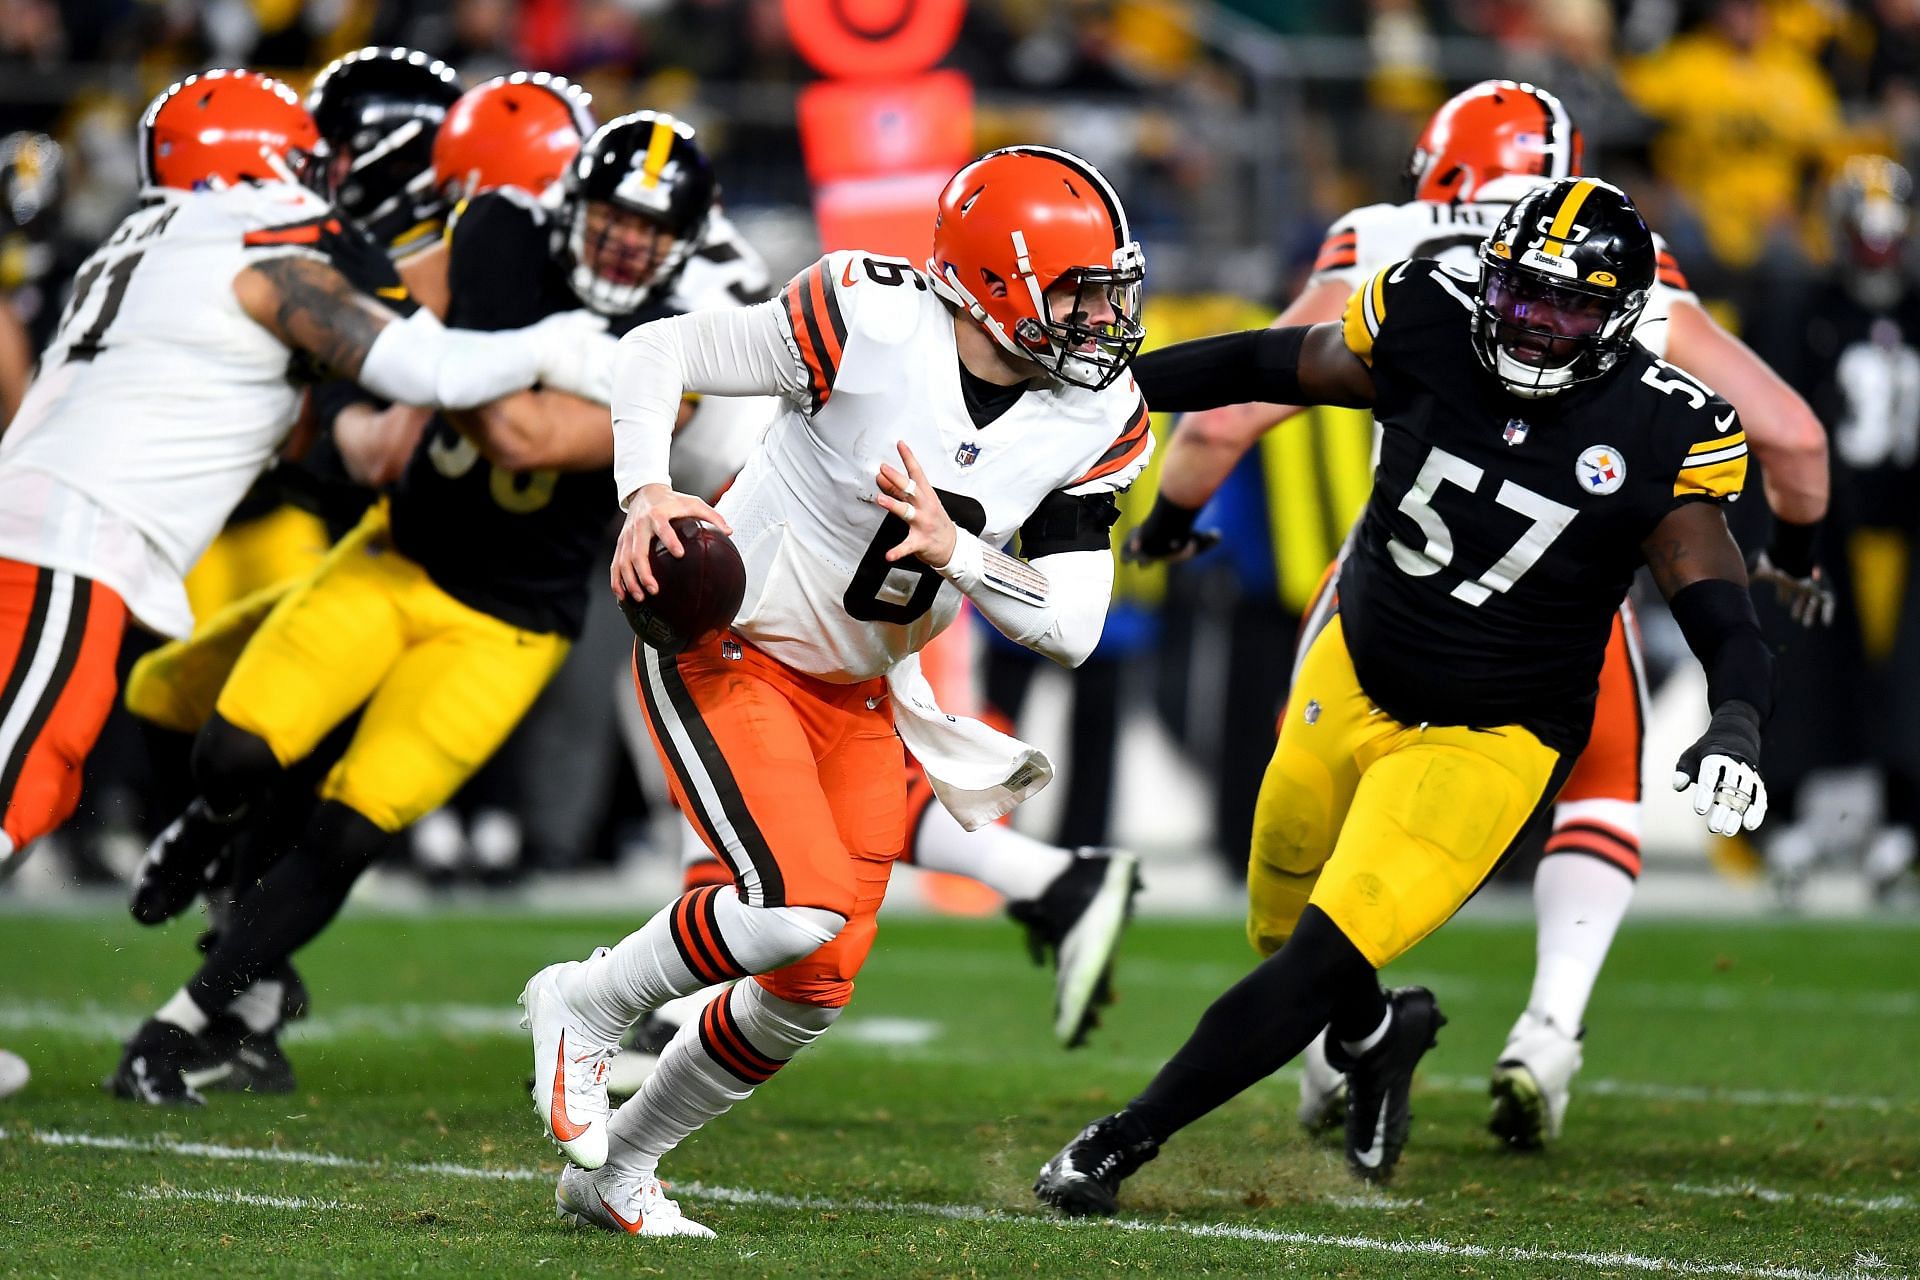 Cleveland Browns quarterback Baker Mayfield on the run